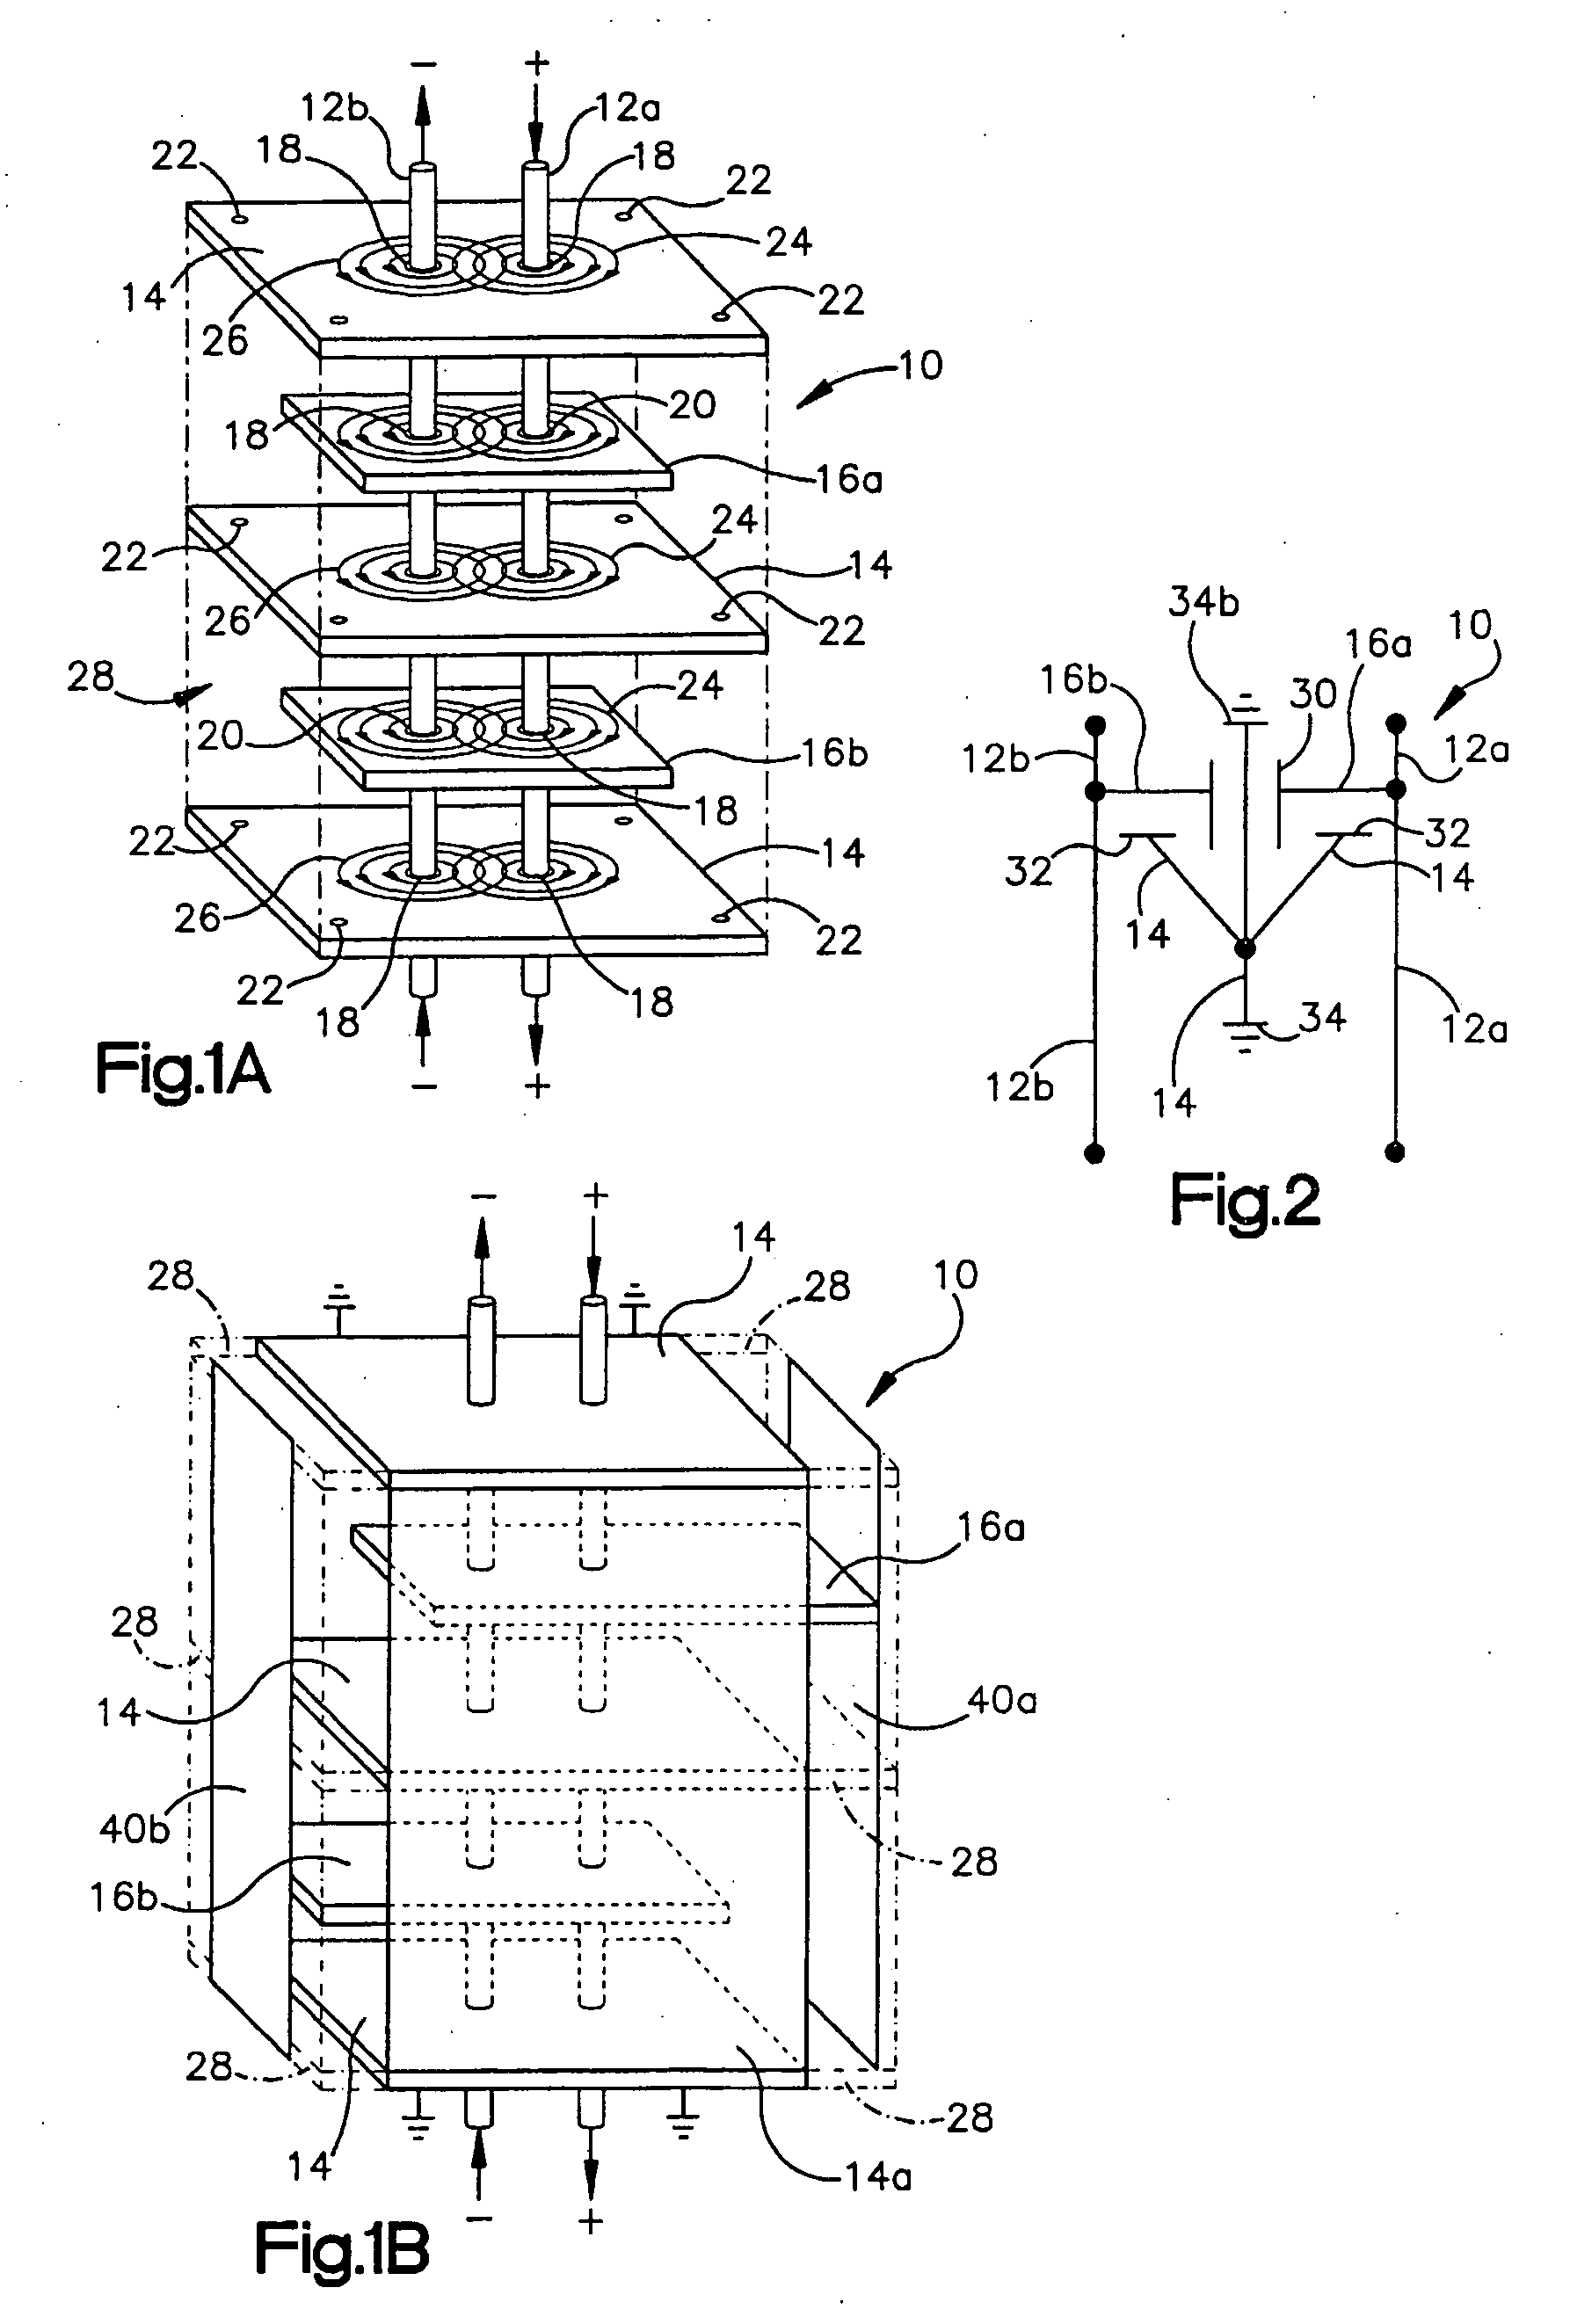 Universal energy conditioning interposer with circuit architecture